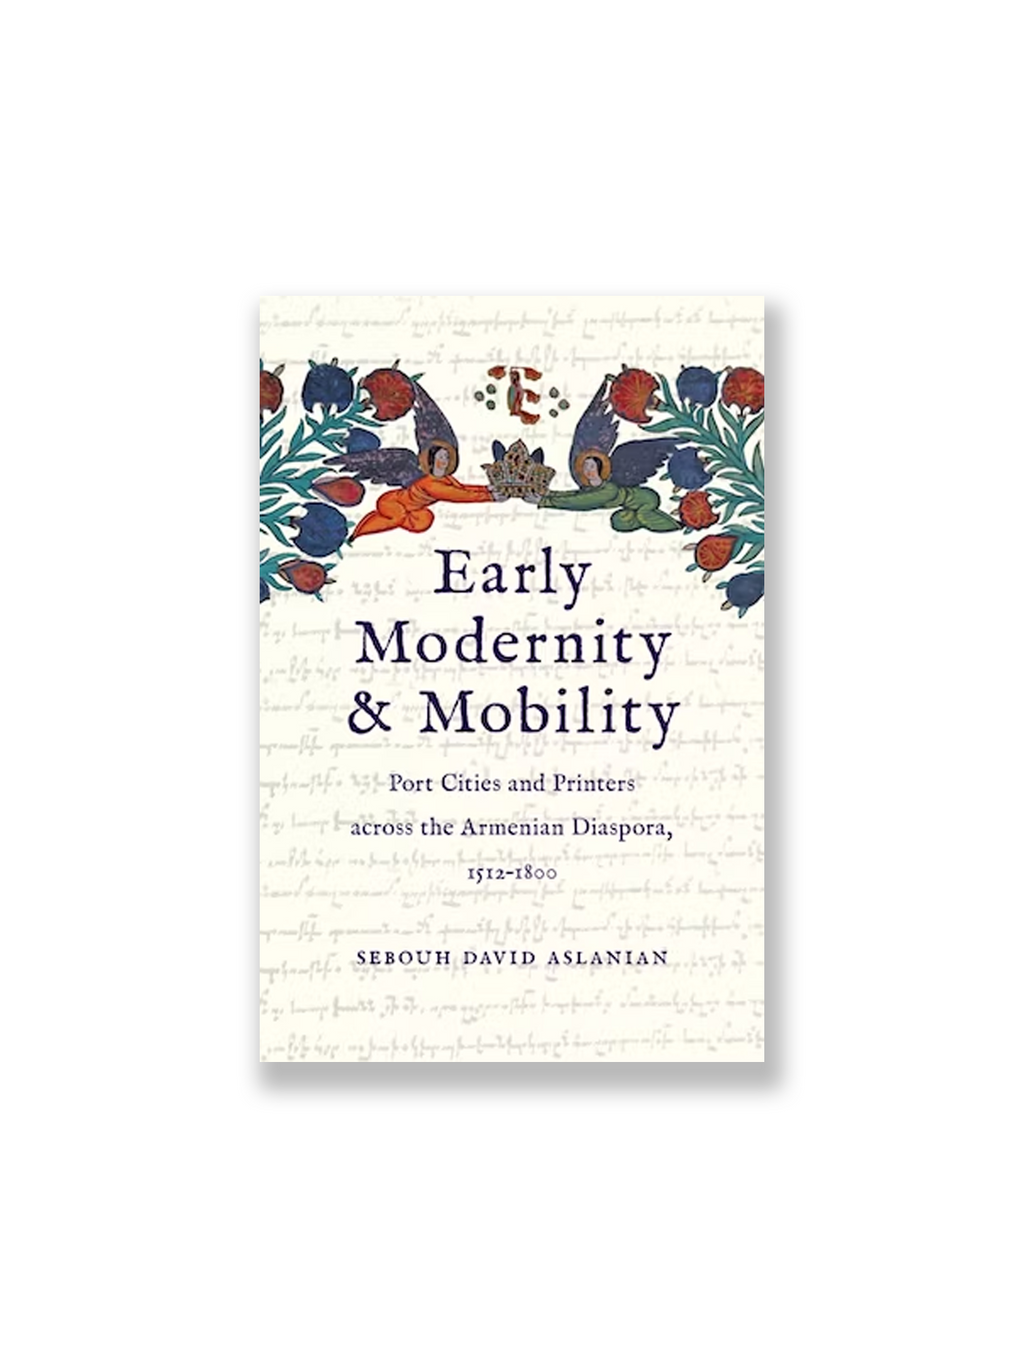 Early Modernity and Mobility